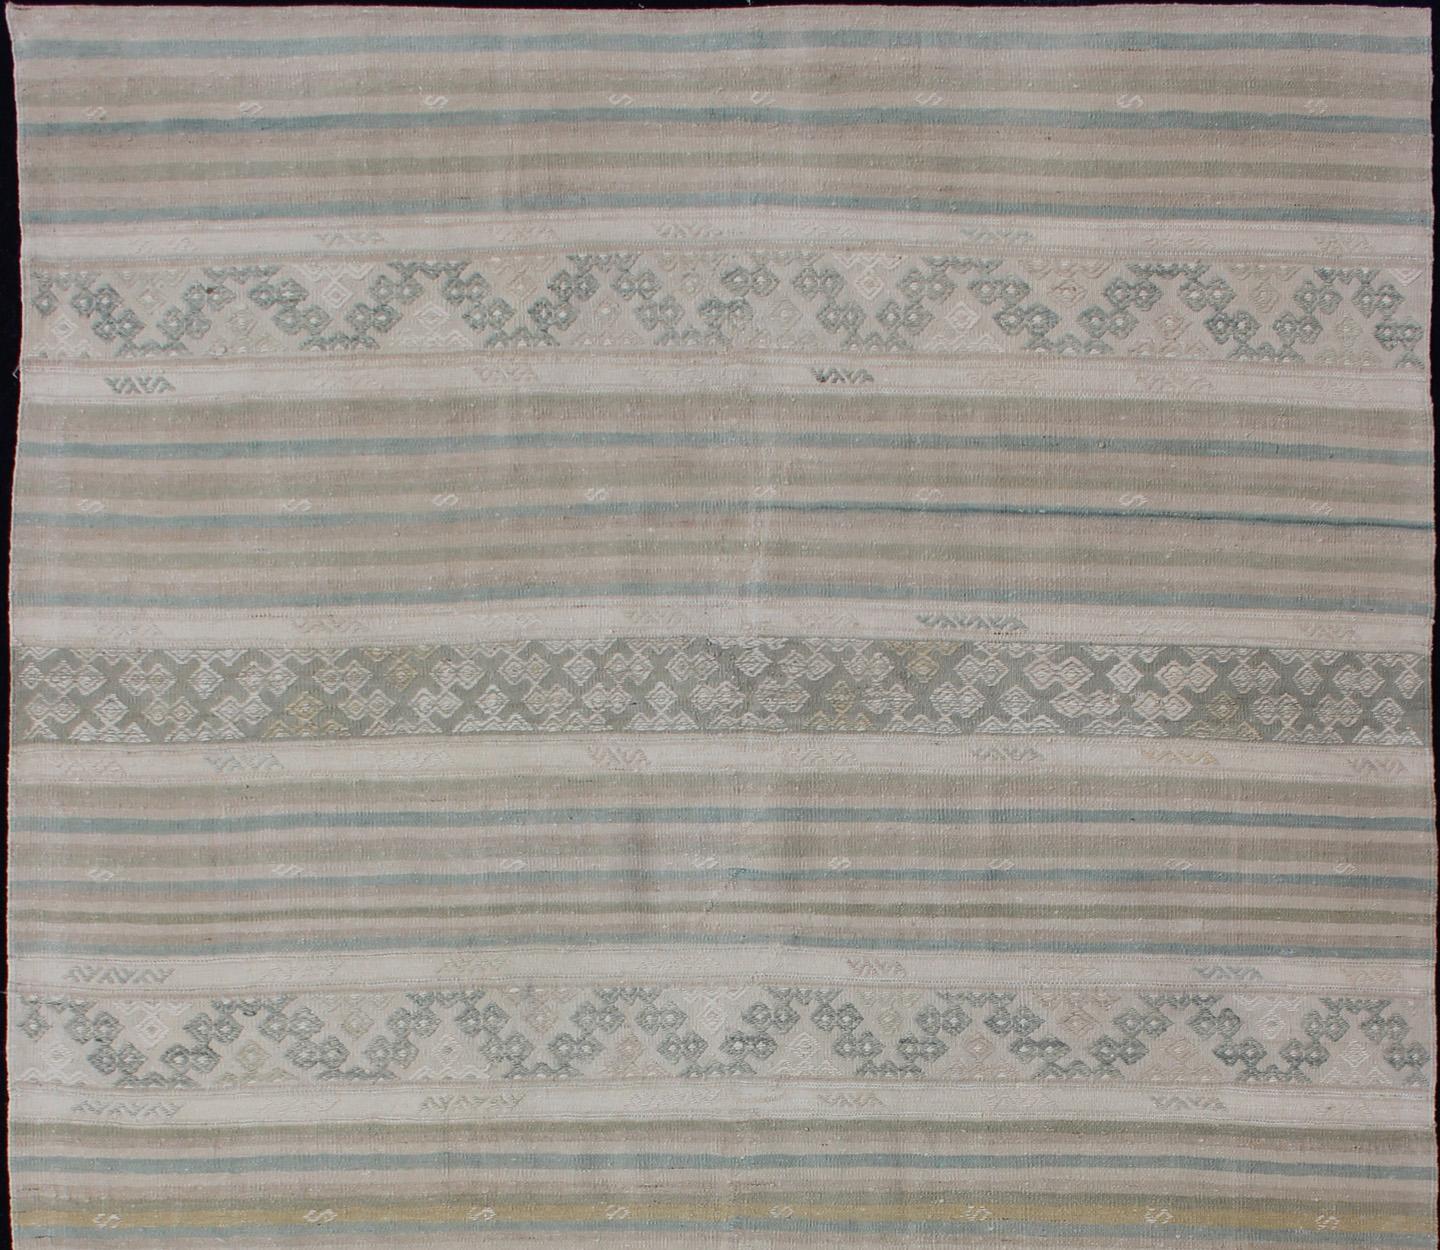 Turkish Kilim vintage carpet in light taupe, green, Tan, Light Brown, blush and, beige and cream, rug EN-179248, country of origin / type: Turkey / Kilim, circa 1950

This Kilim rug from Turkey features a striped design of various geometric patterns